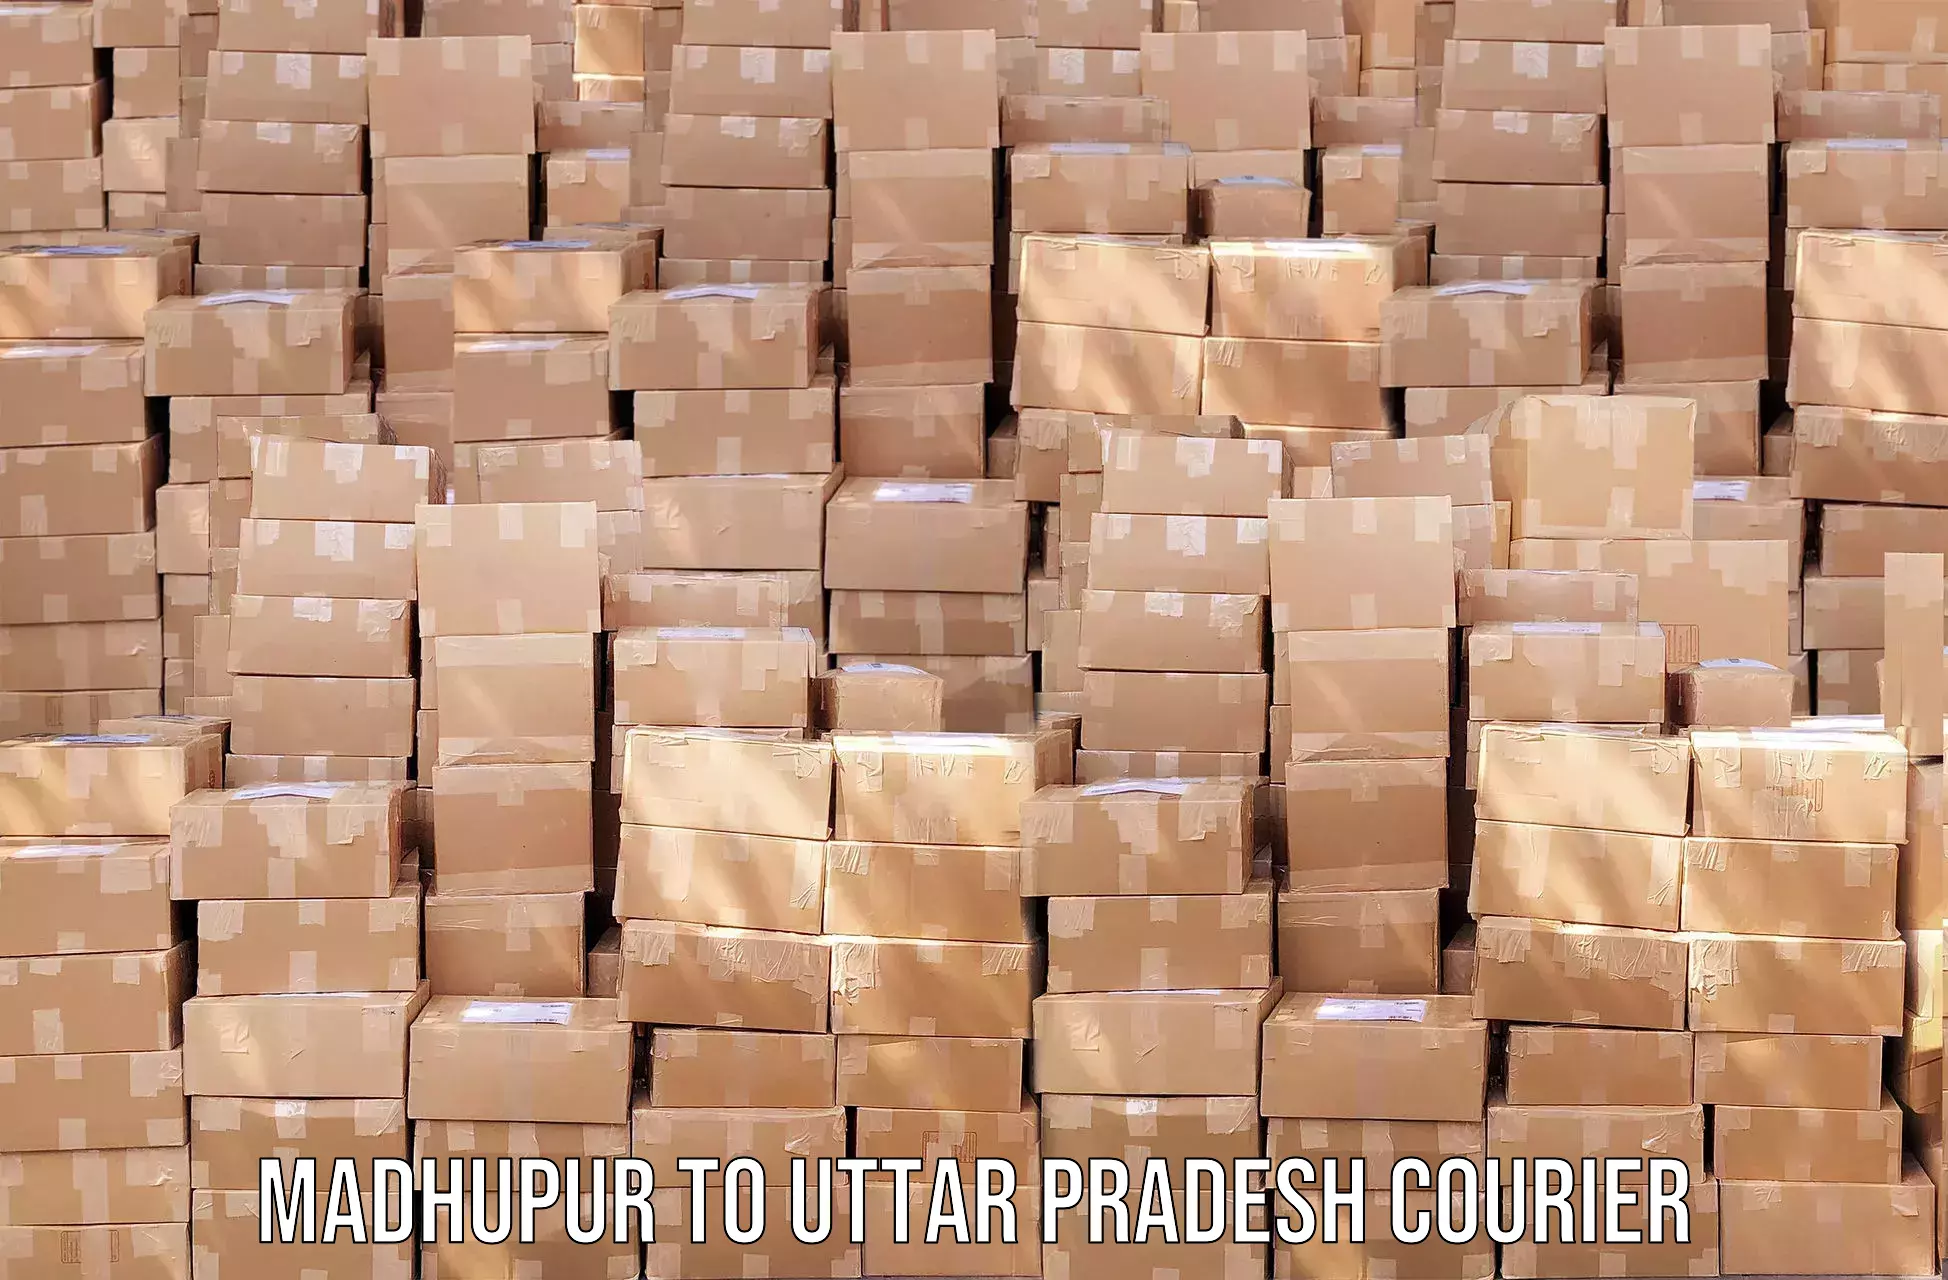 Courier service efficiency Madhupur to Bighapur